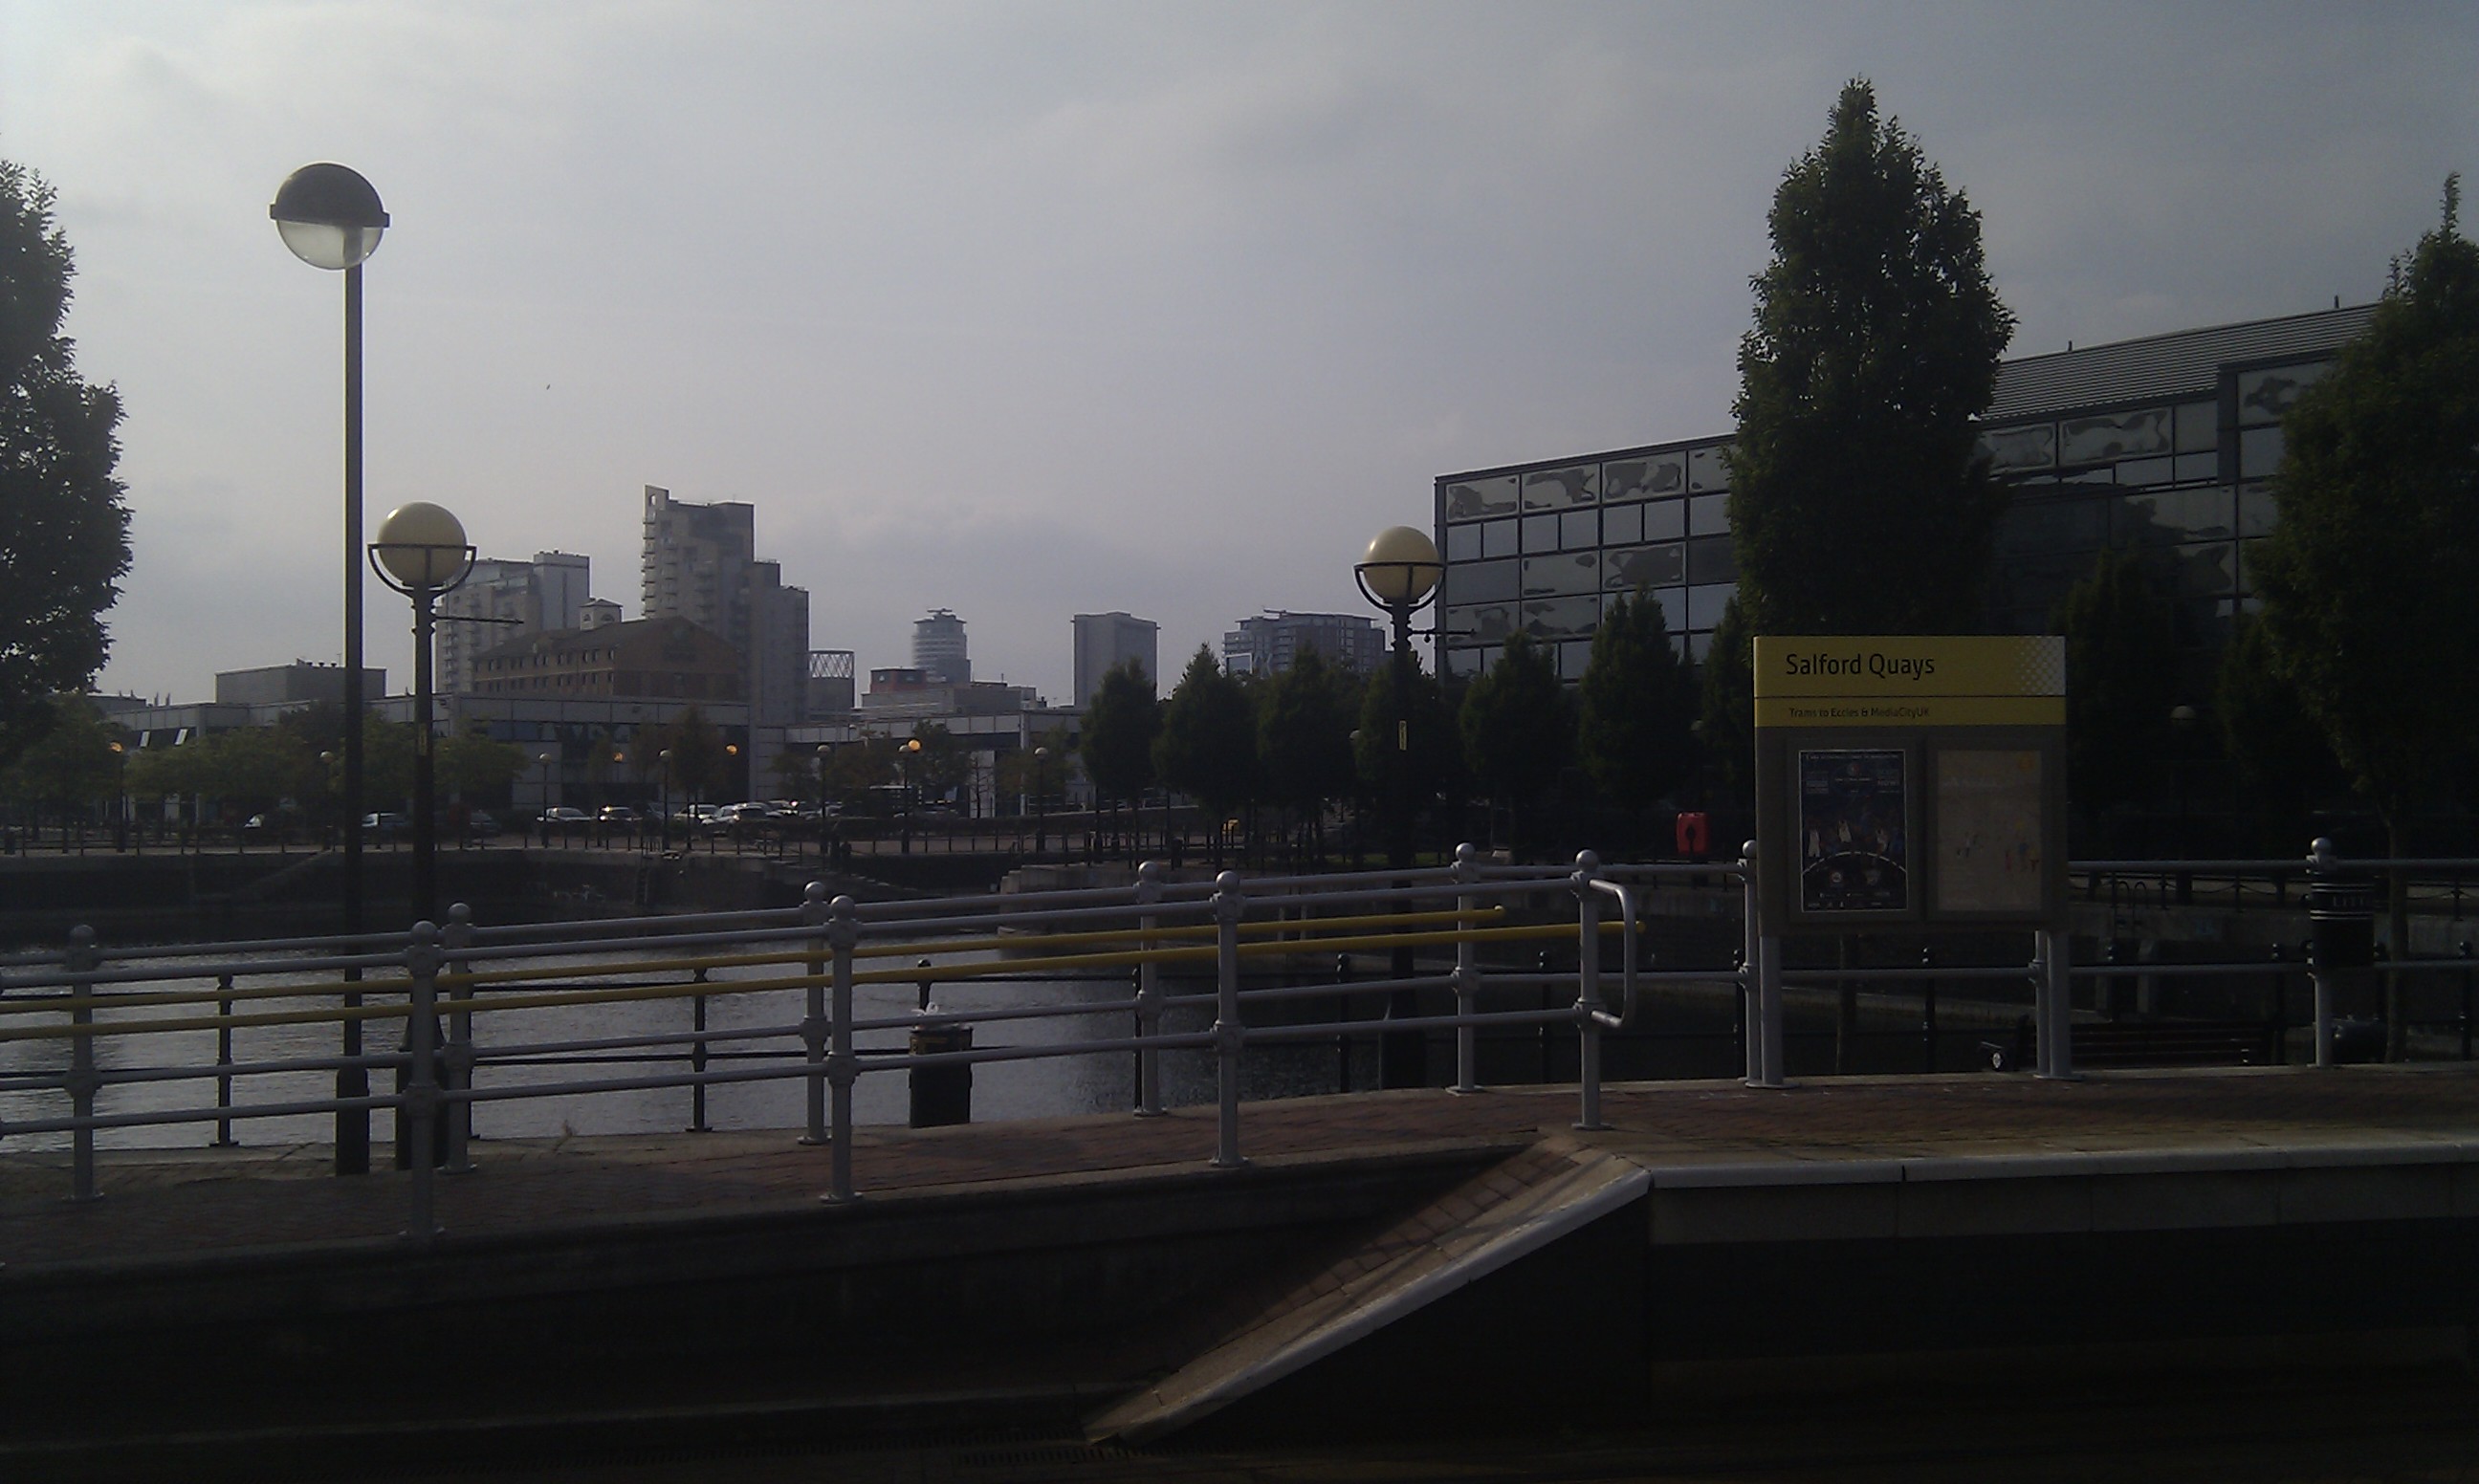 The view from Salford Quays tram stop. "I remember when this was all just rubble"